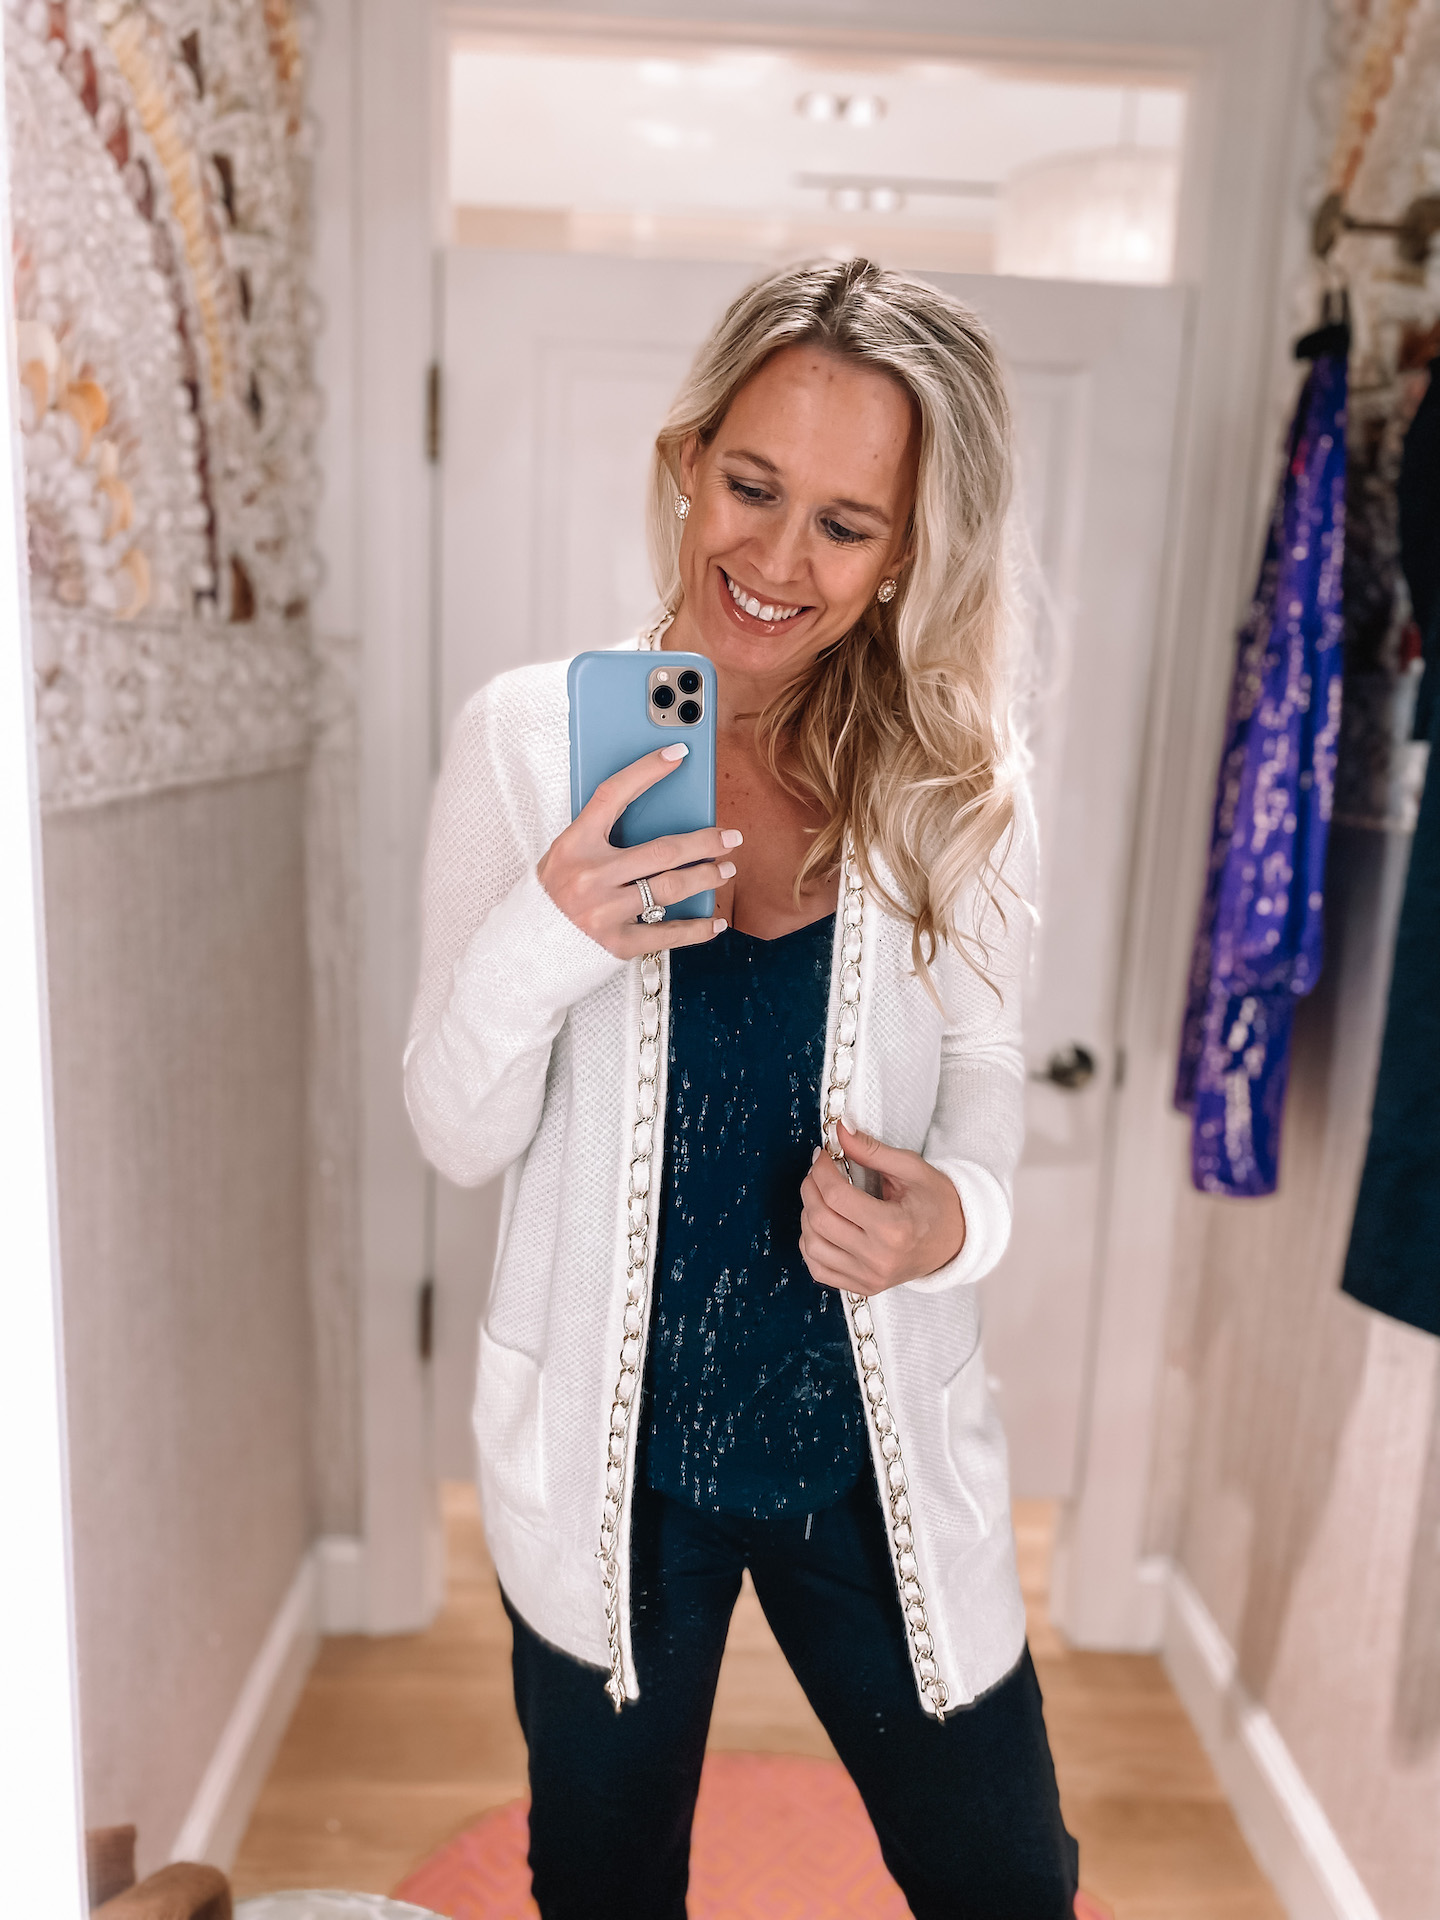 2022 Lilly Pulitzer Sunshine Sale | Winter Lilly Pulitzer Online Sale | APS Guide with Tips and Predictions | Silk top and white cardigan